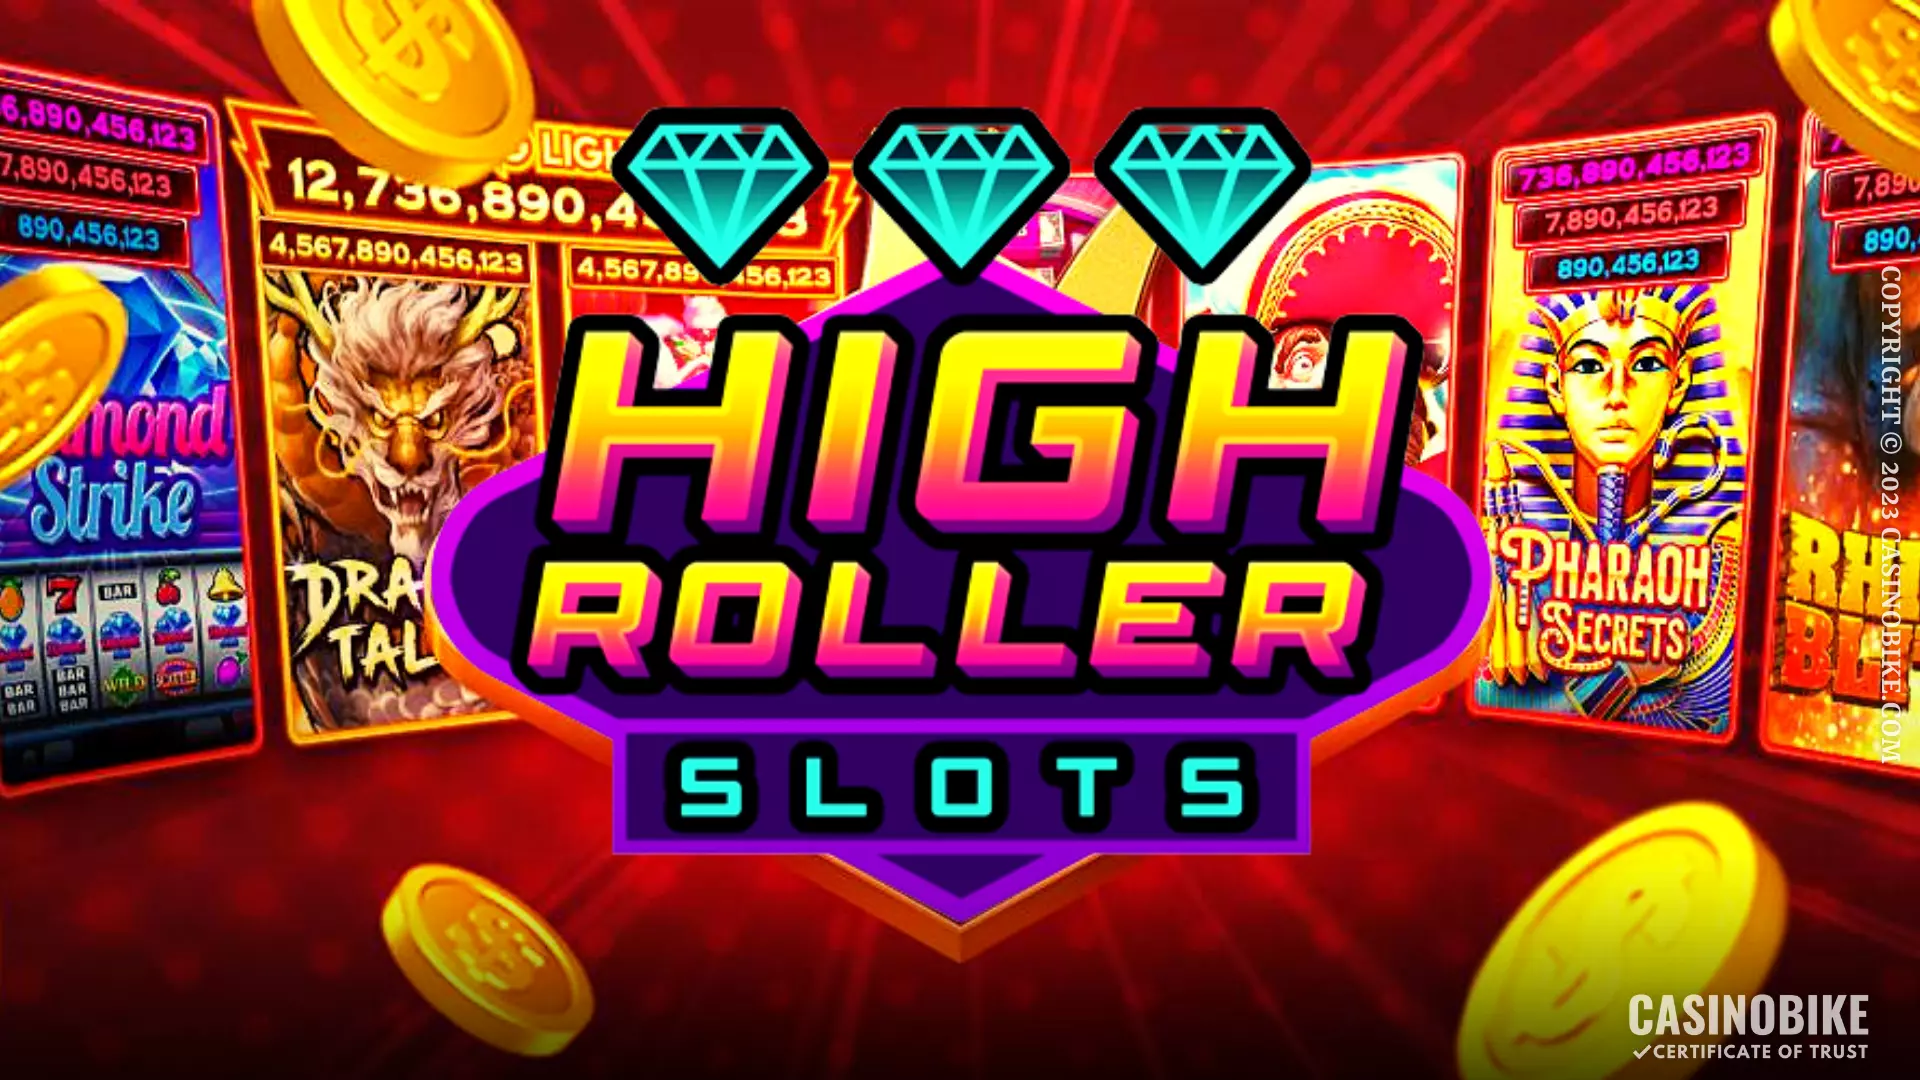 Maximizing Your Winnings: Strategies for USA High Roller Slot Players